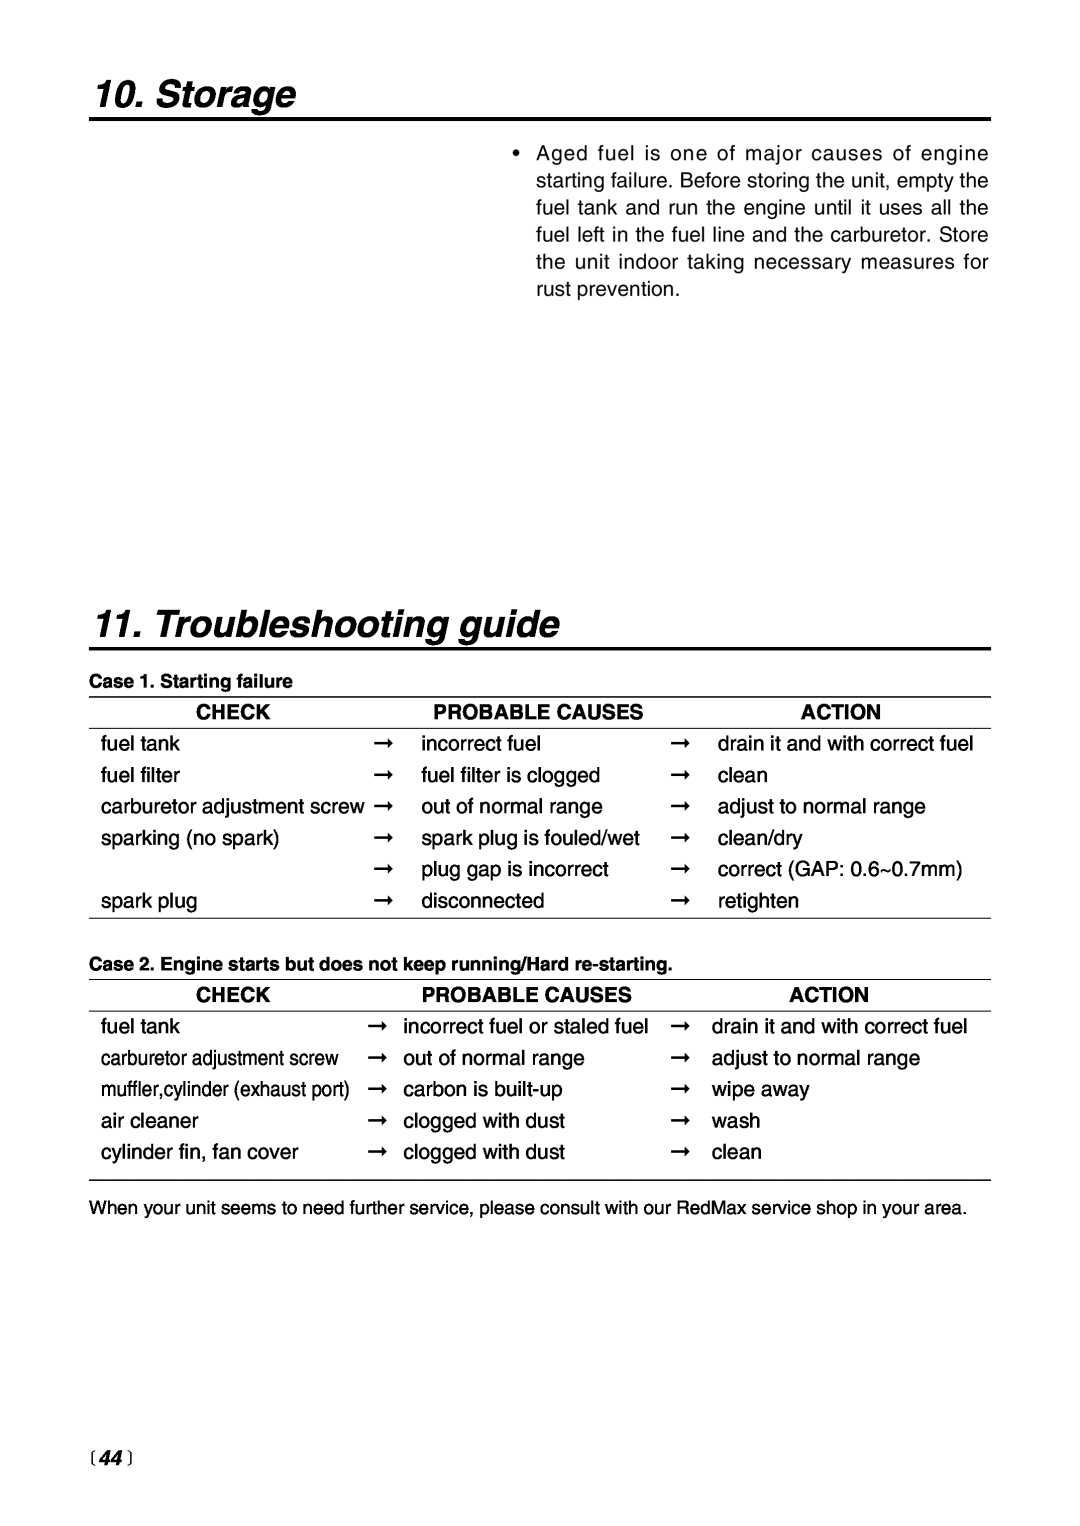 RedMax EXZ2401S-BC manual Storage, Troubleshooting guide,  44  